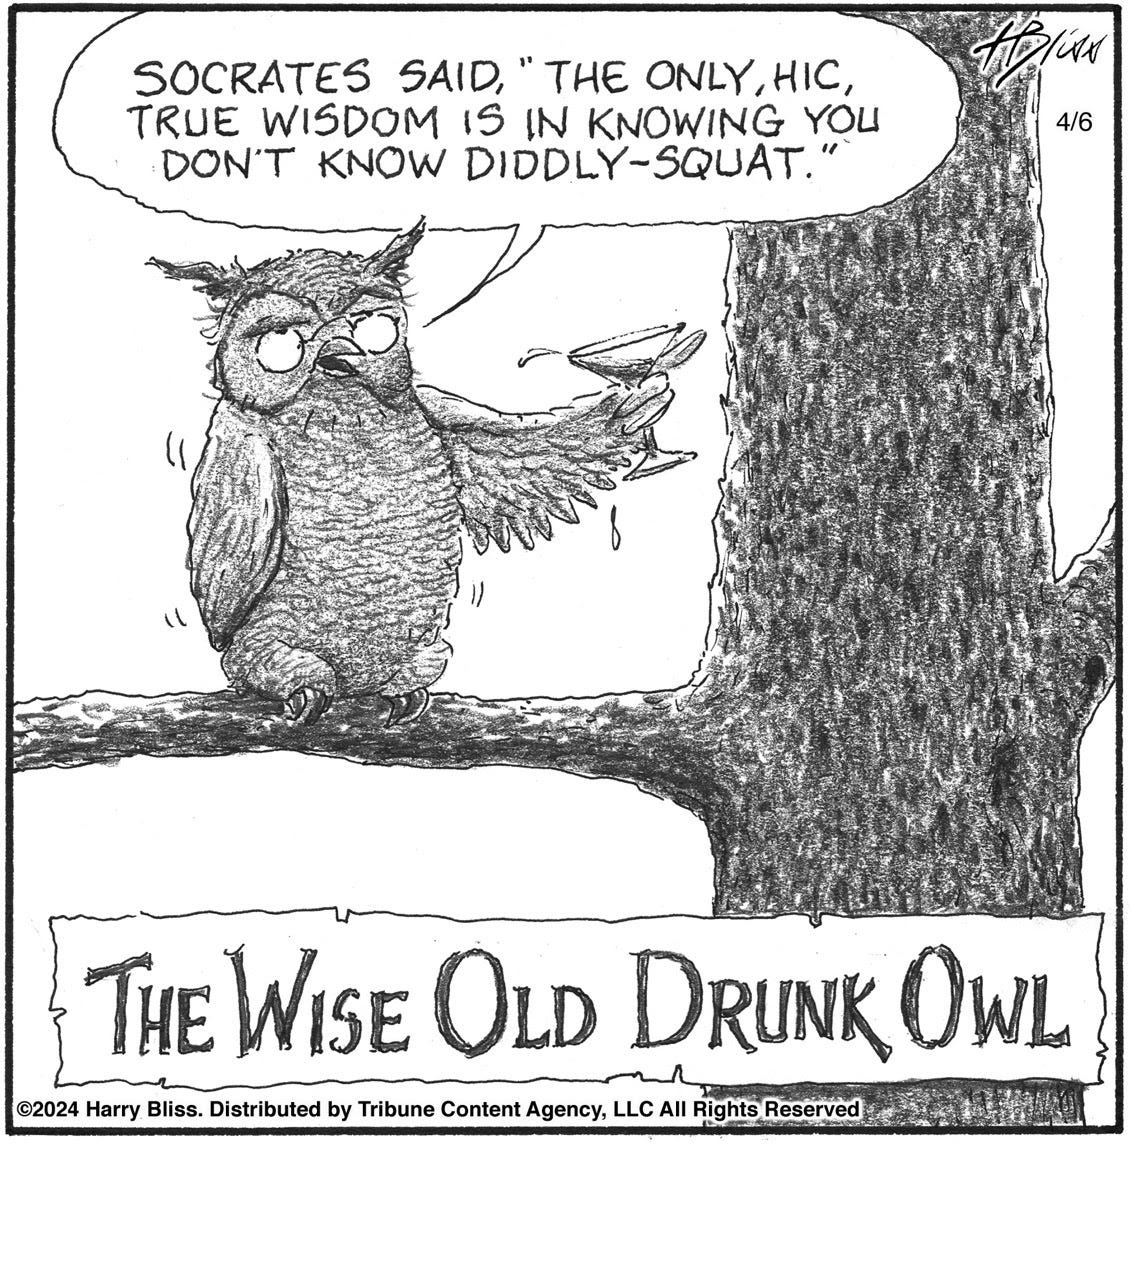 The wise old drunk owl…